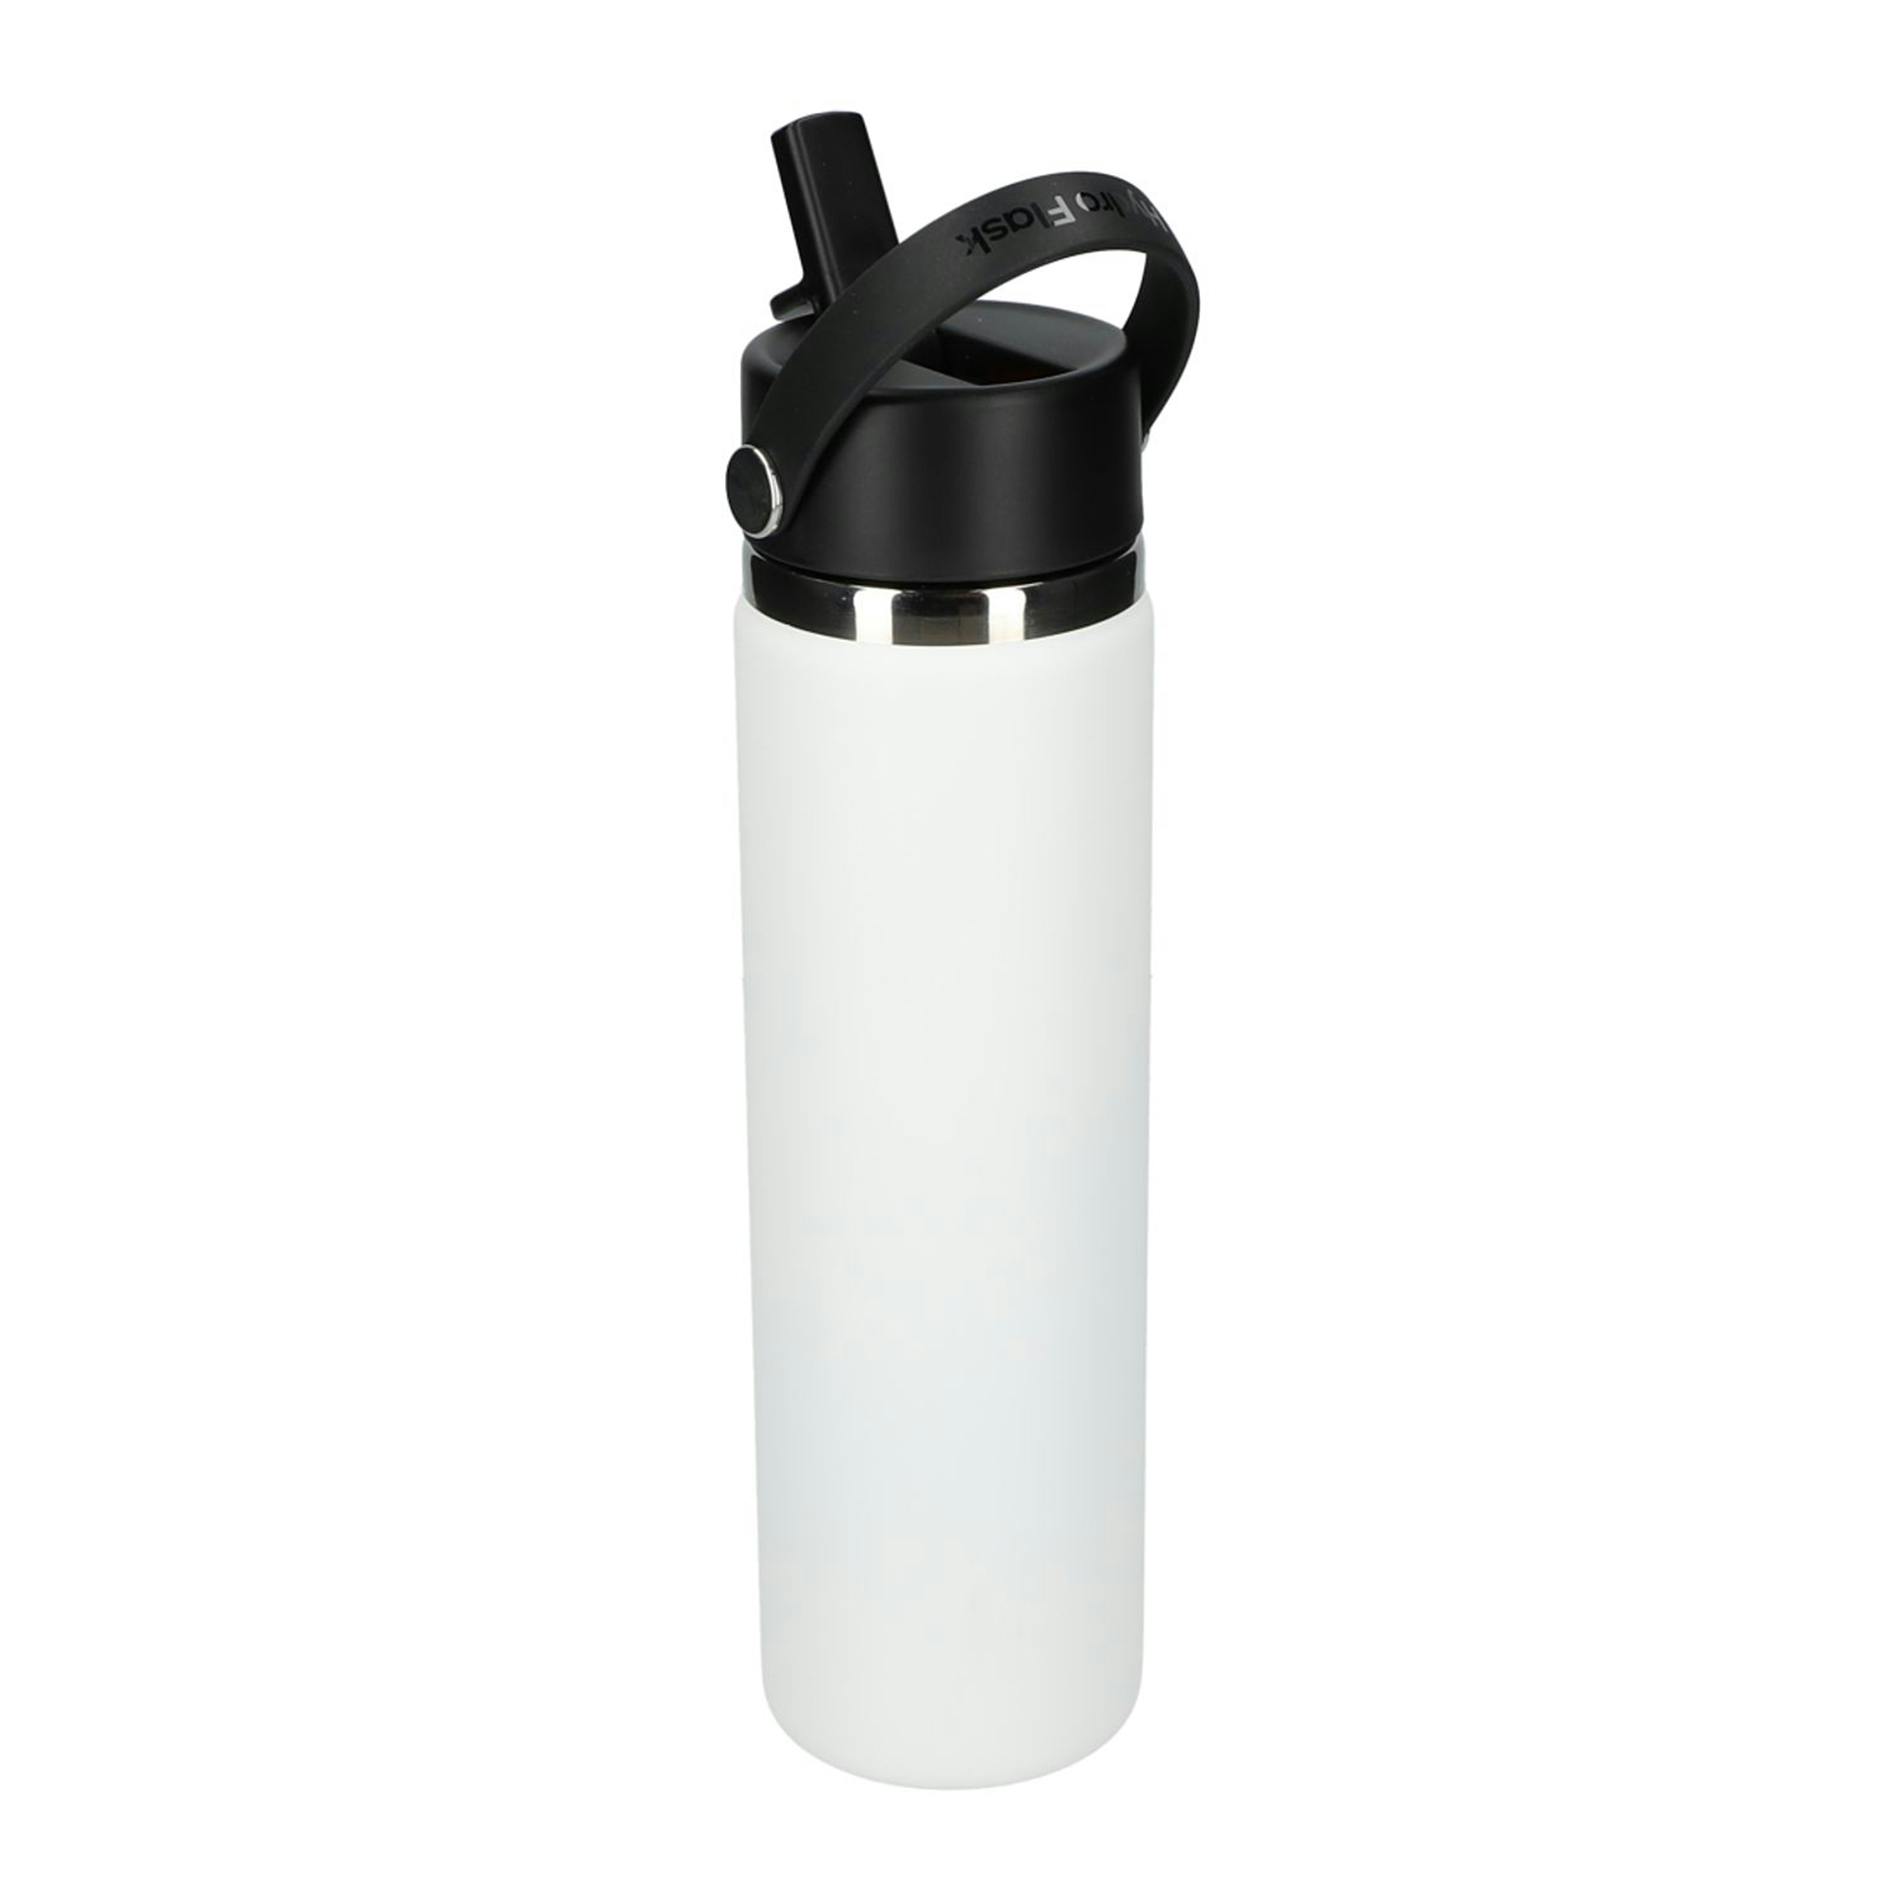 Hydro Flask Wide Mouth 24oz Bottle with Flex Straw Cap - additional Image 4